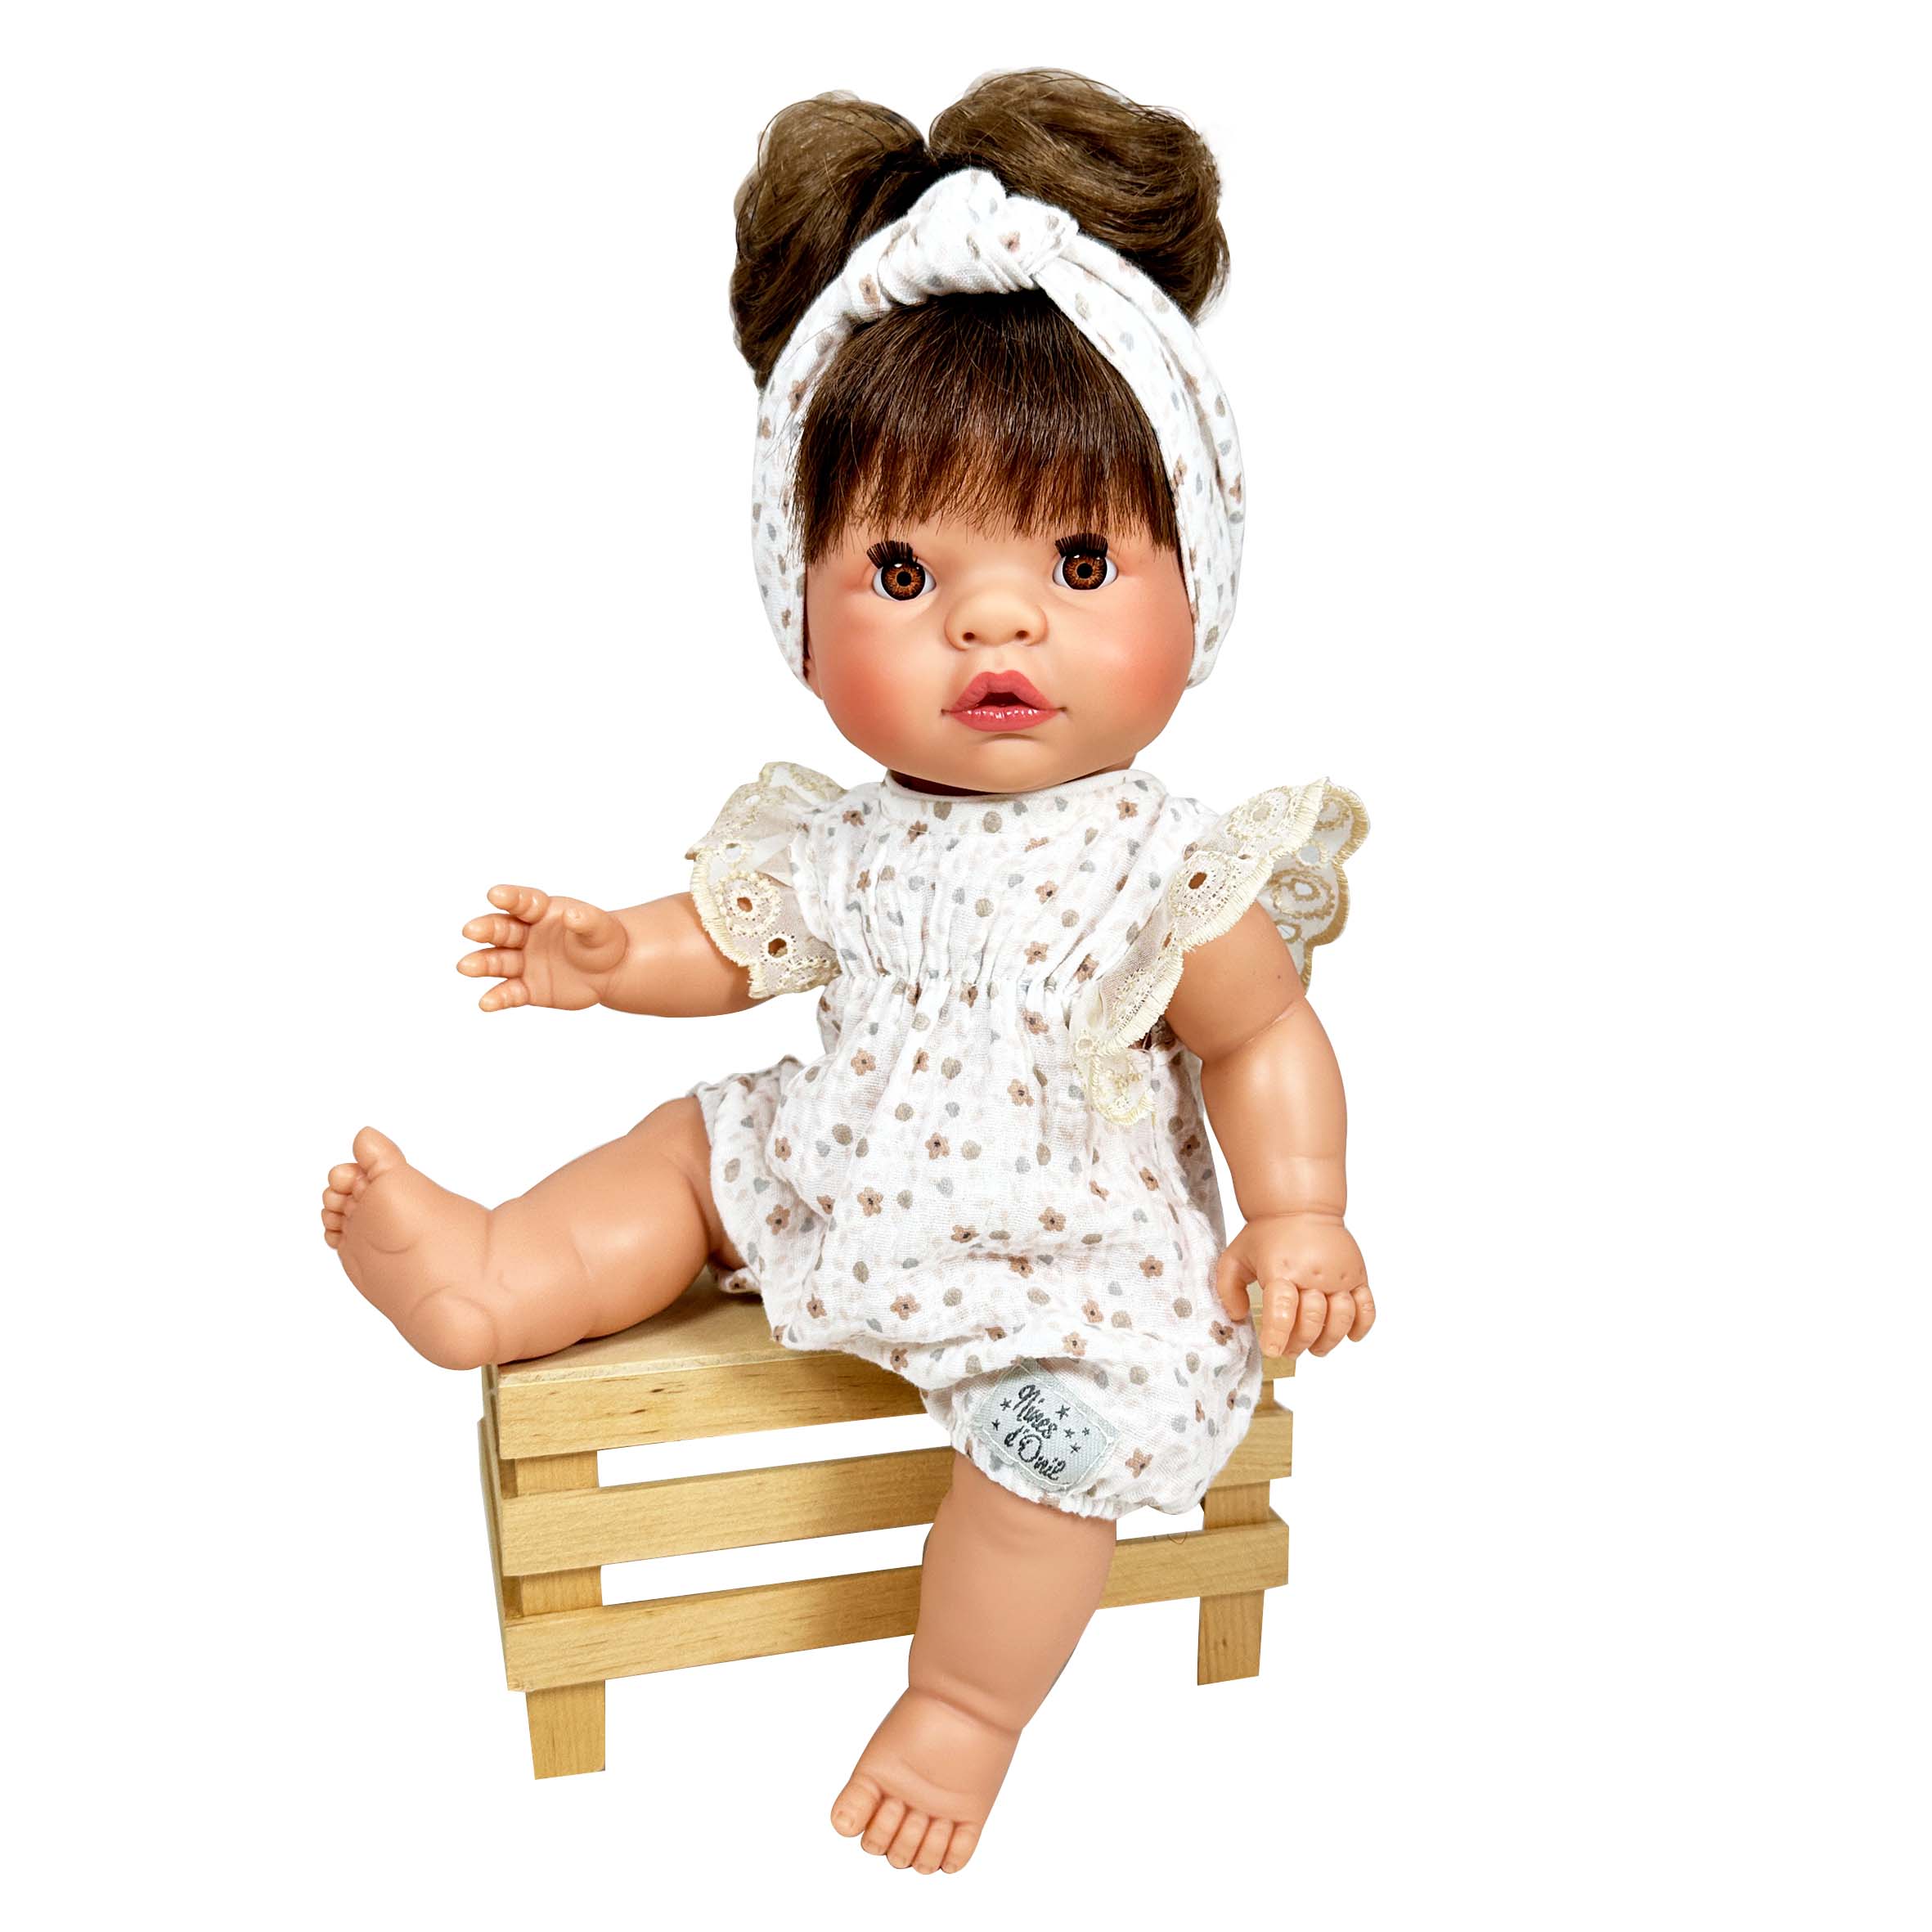 Handmade Collectible Joy Collection Baby Doll (3070) by Nines D&